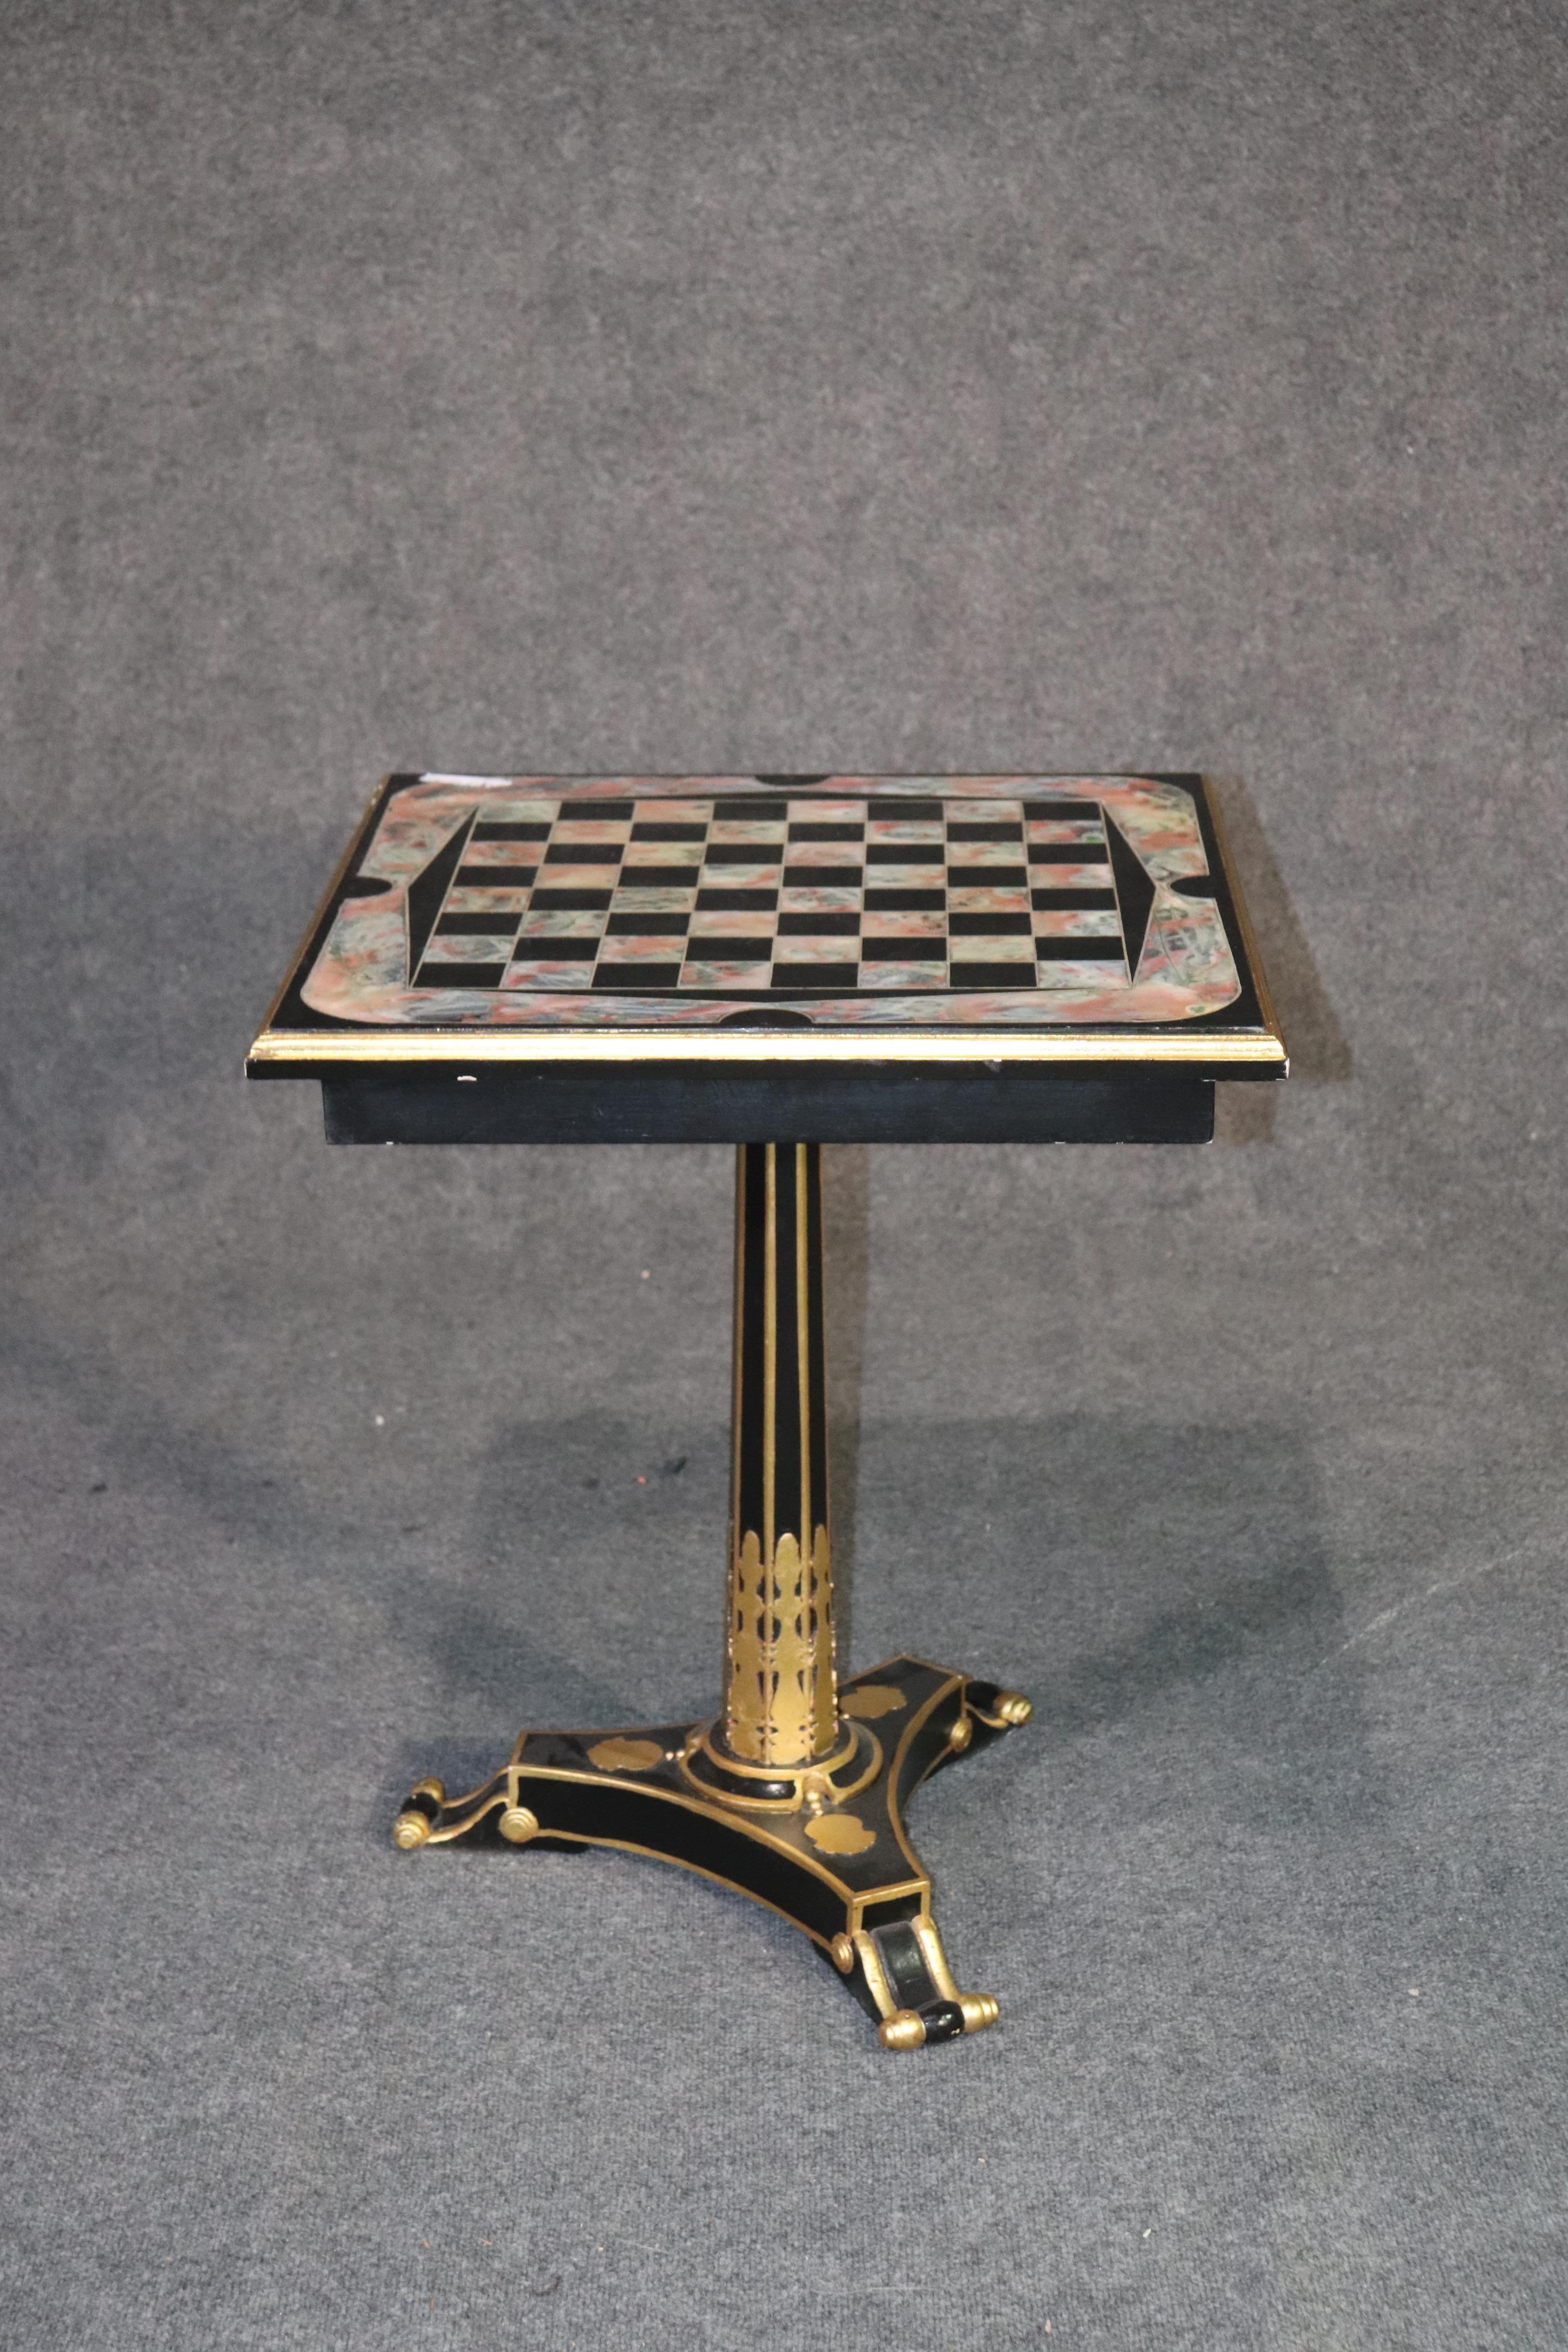 This is a beautifully designed French Empire style games table. Perfect for chess or checkers, this tables features an ebonized frame with faux marble decorated top and gilded elements to add even more luxury to this table. The table measures 27 3/4